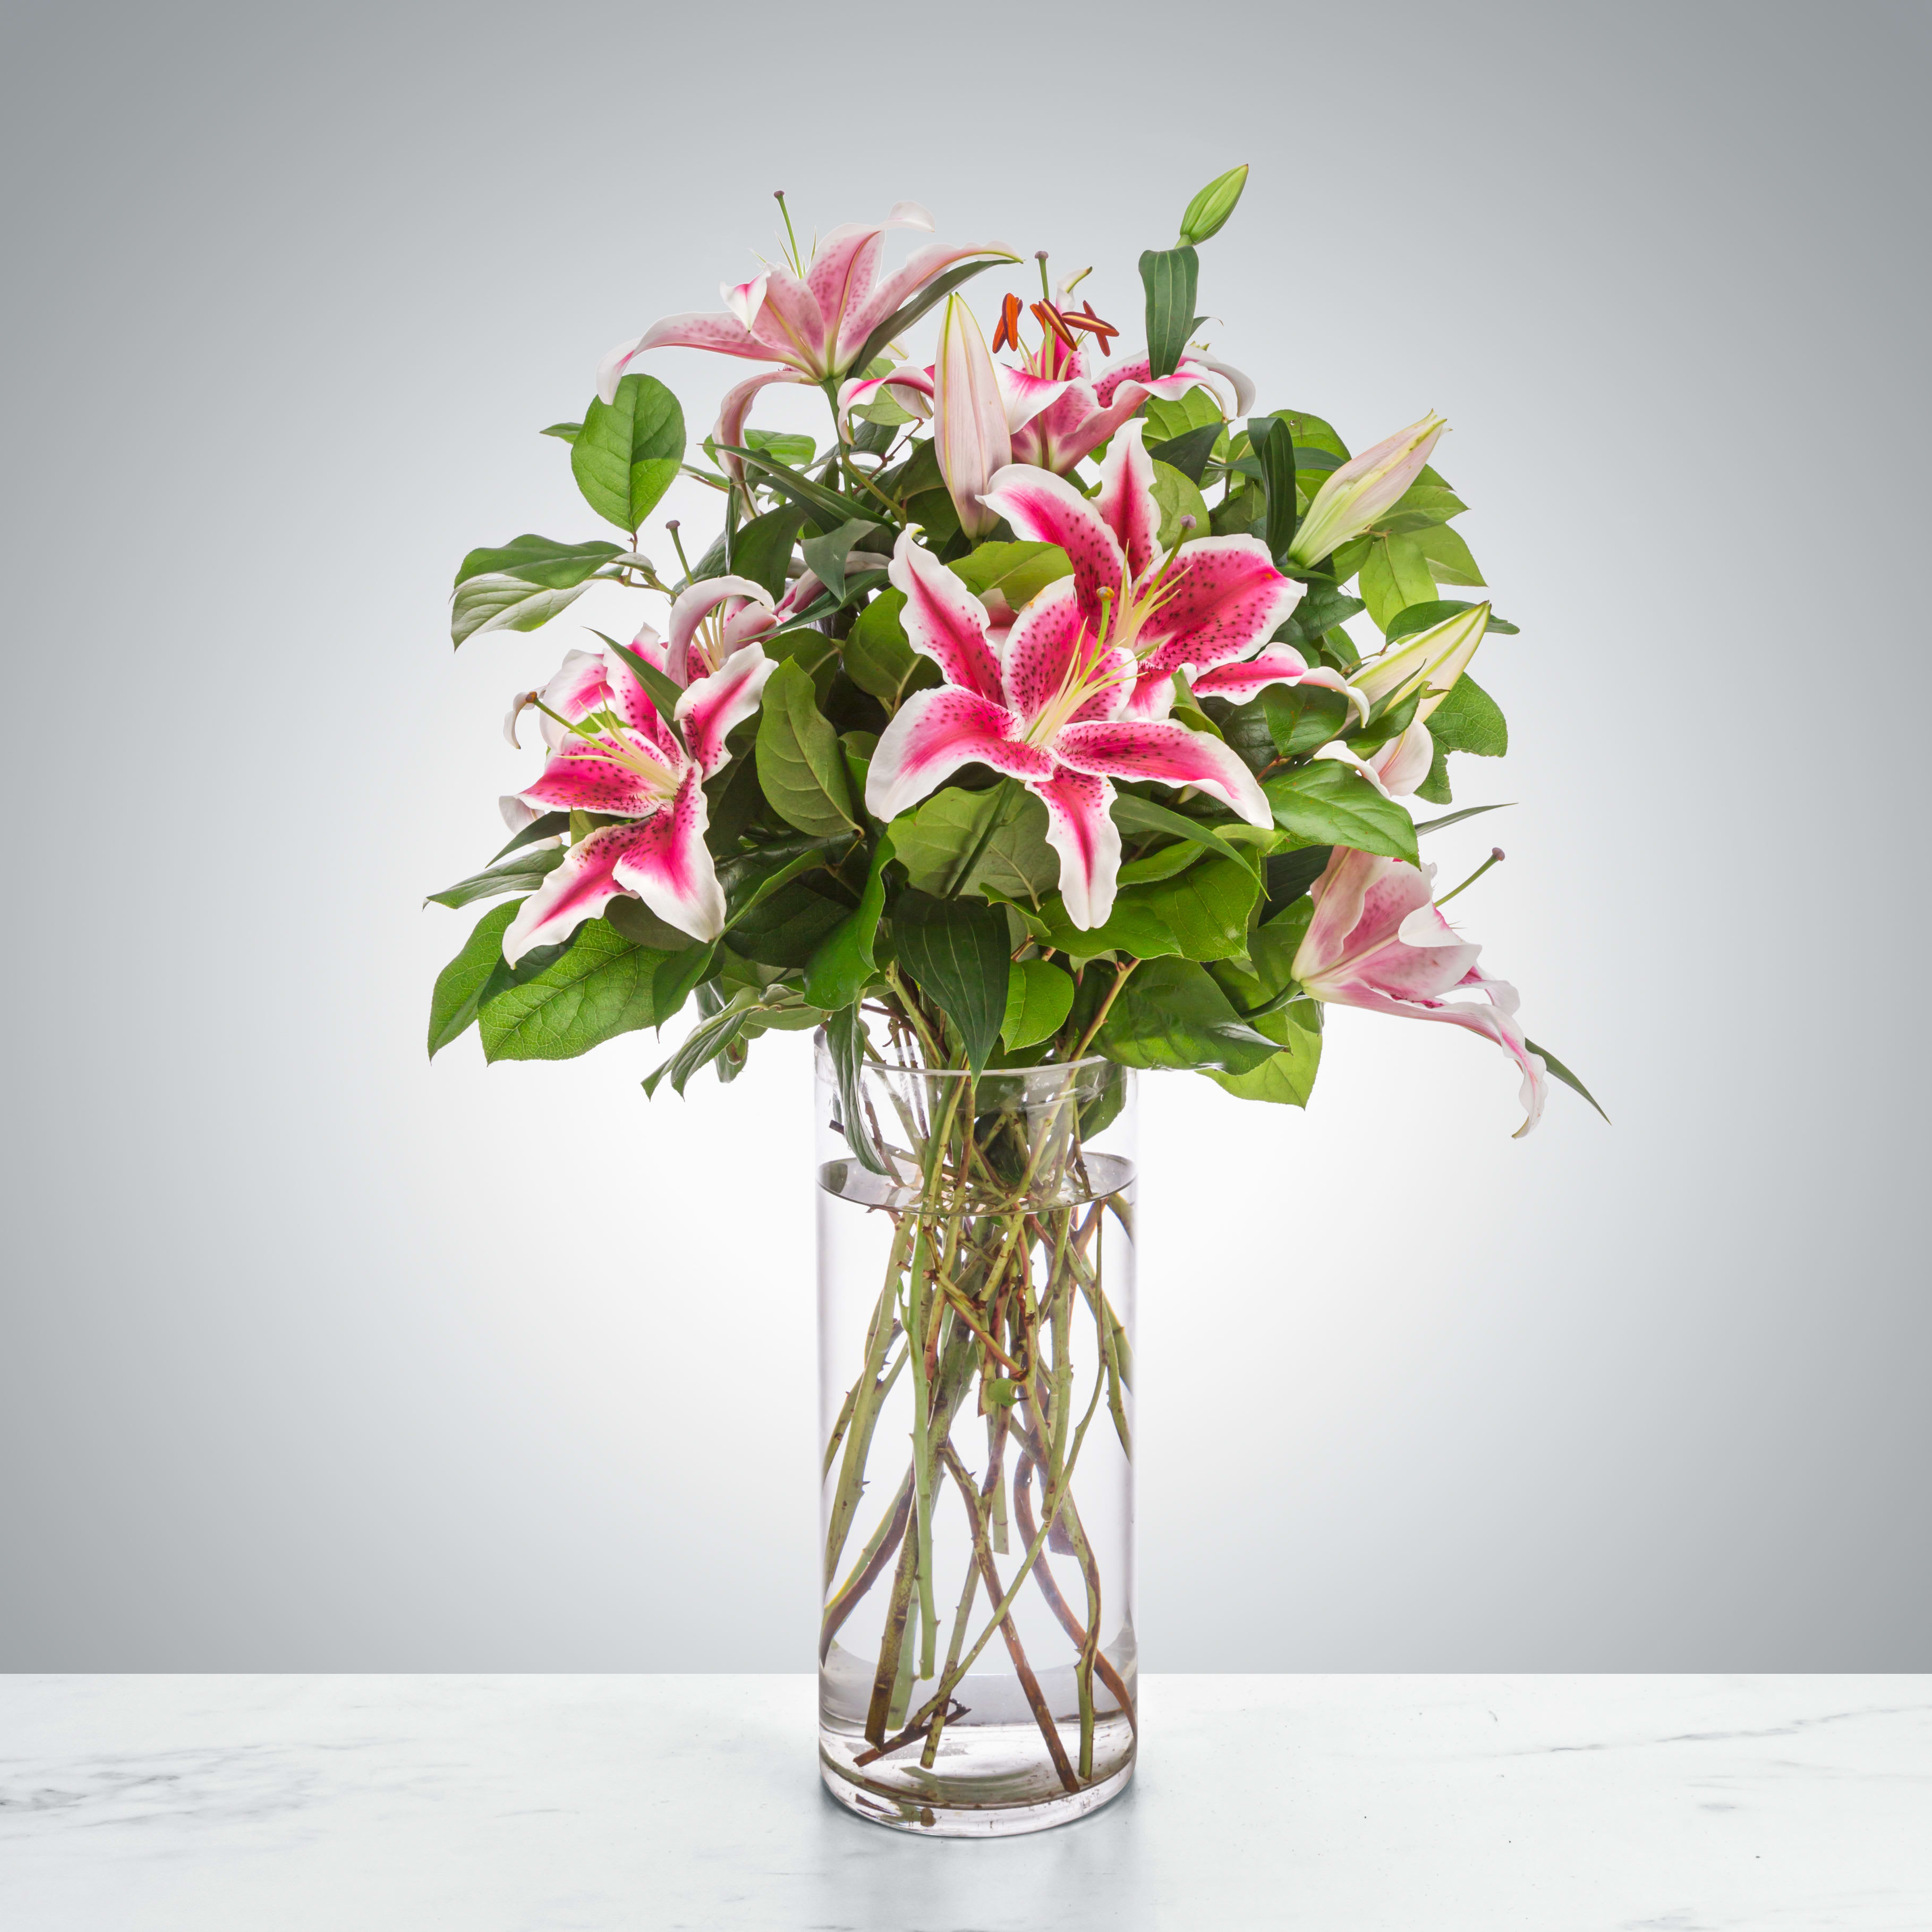 Splendent Stargazers by BloomNation™ - Pink lilies stand for love, admiration, compassion, and femininity. Send this sweet-smelling lily arrangement for Mother's Day, Women's Day, or an Anniversary.  1st Image: Standard 2nd Image: Premium